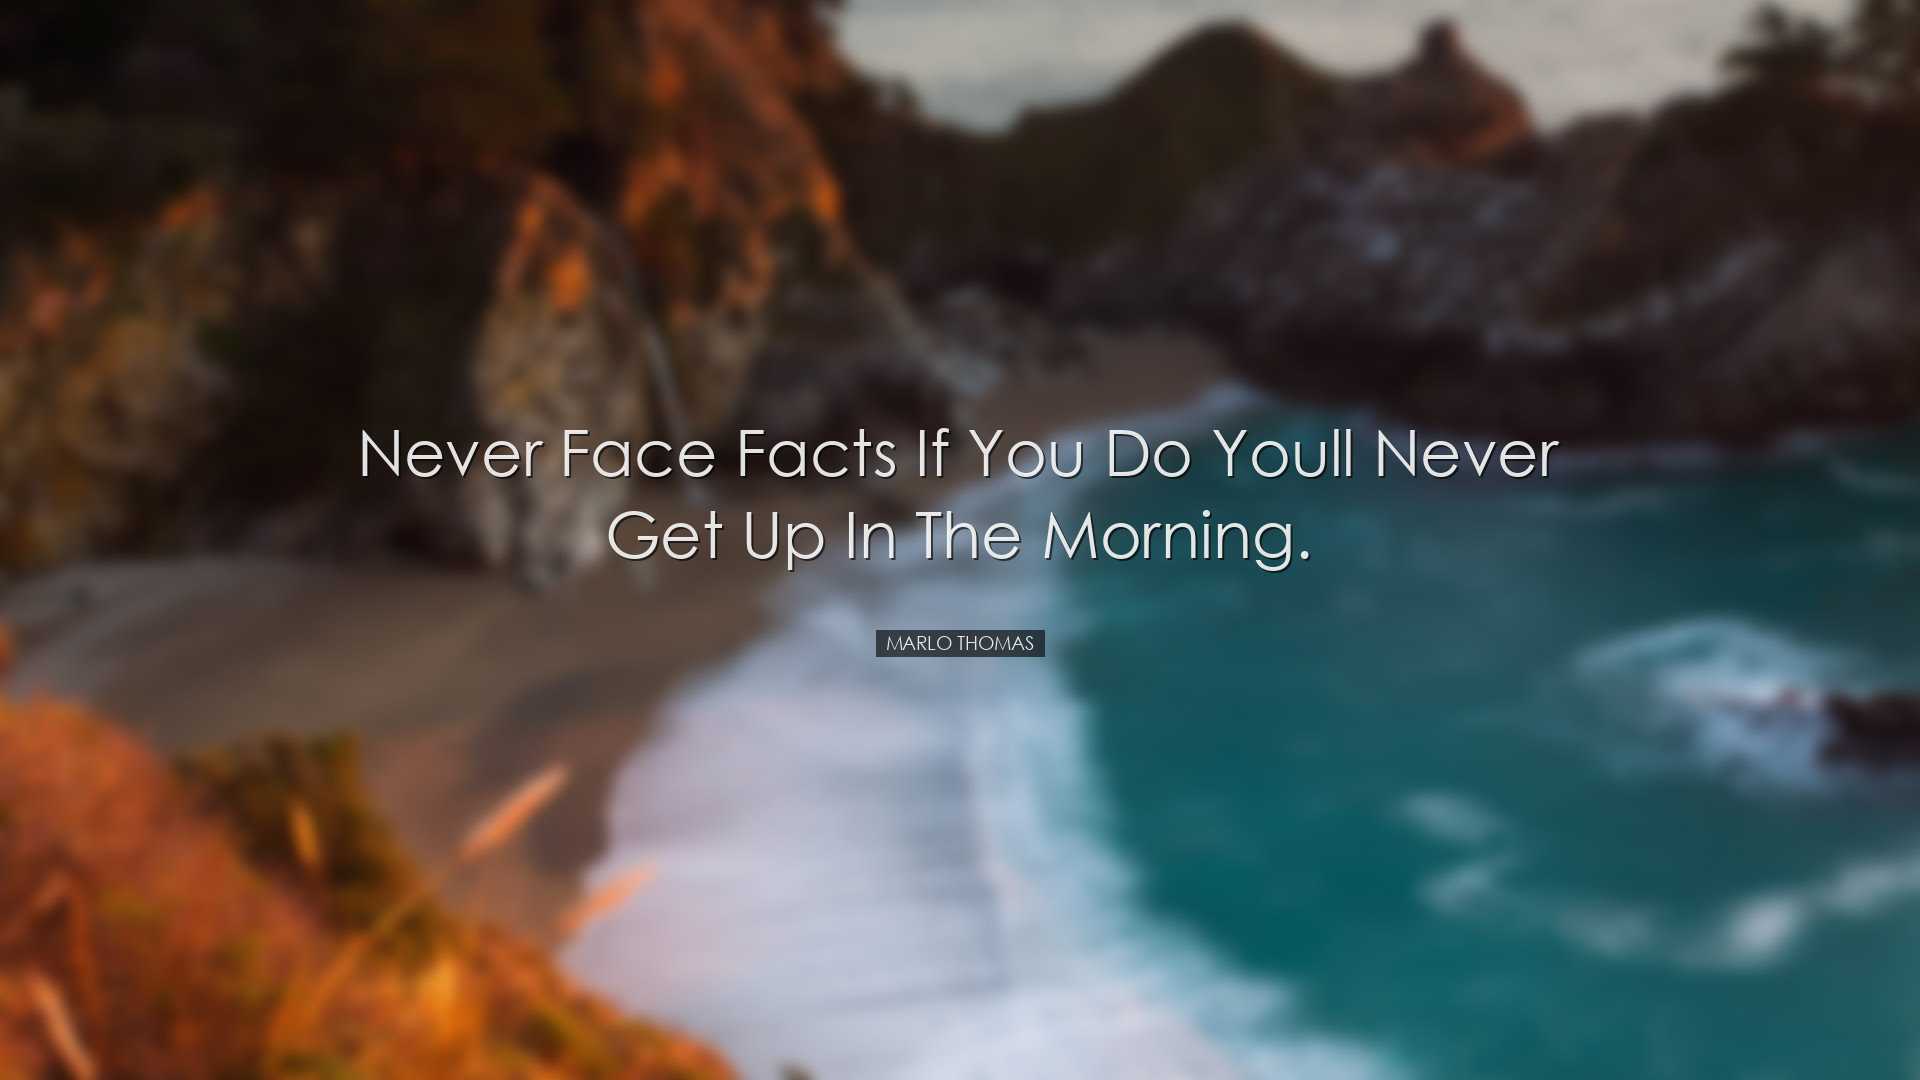 Never face facts if you do youll never get up in the morning. - Ma